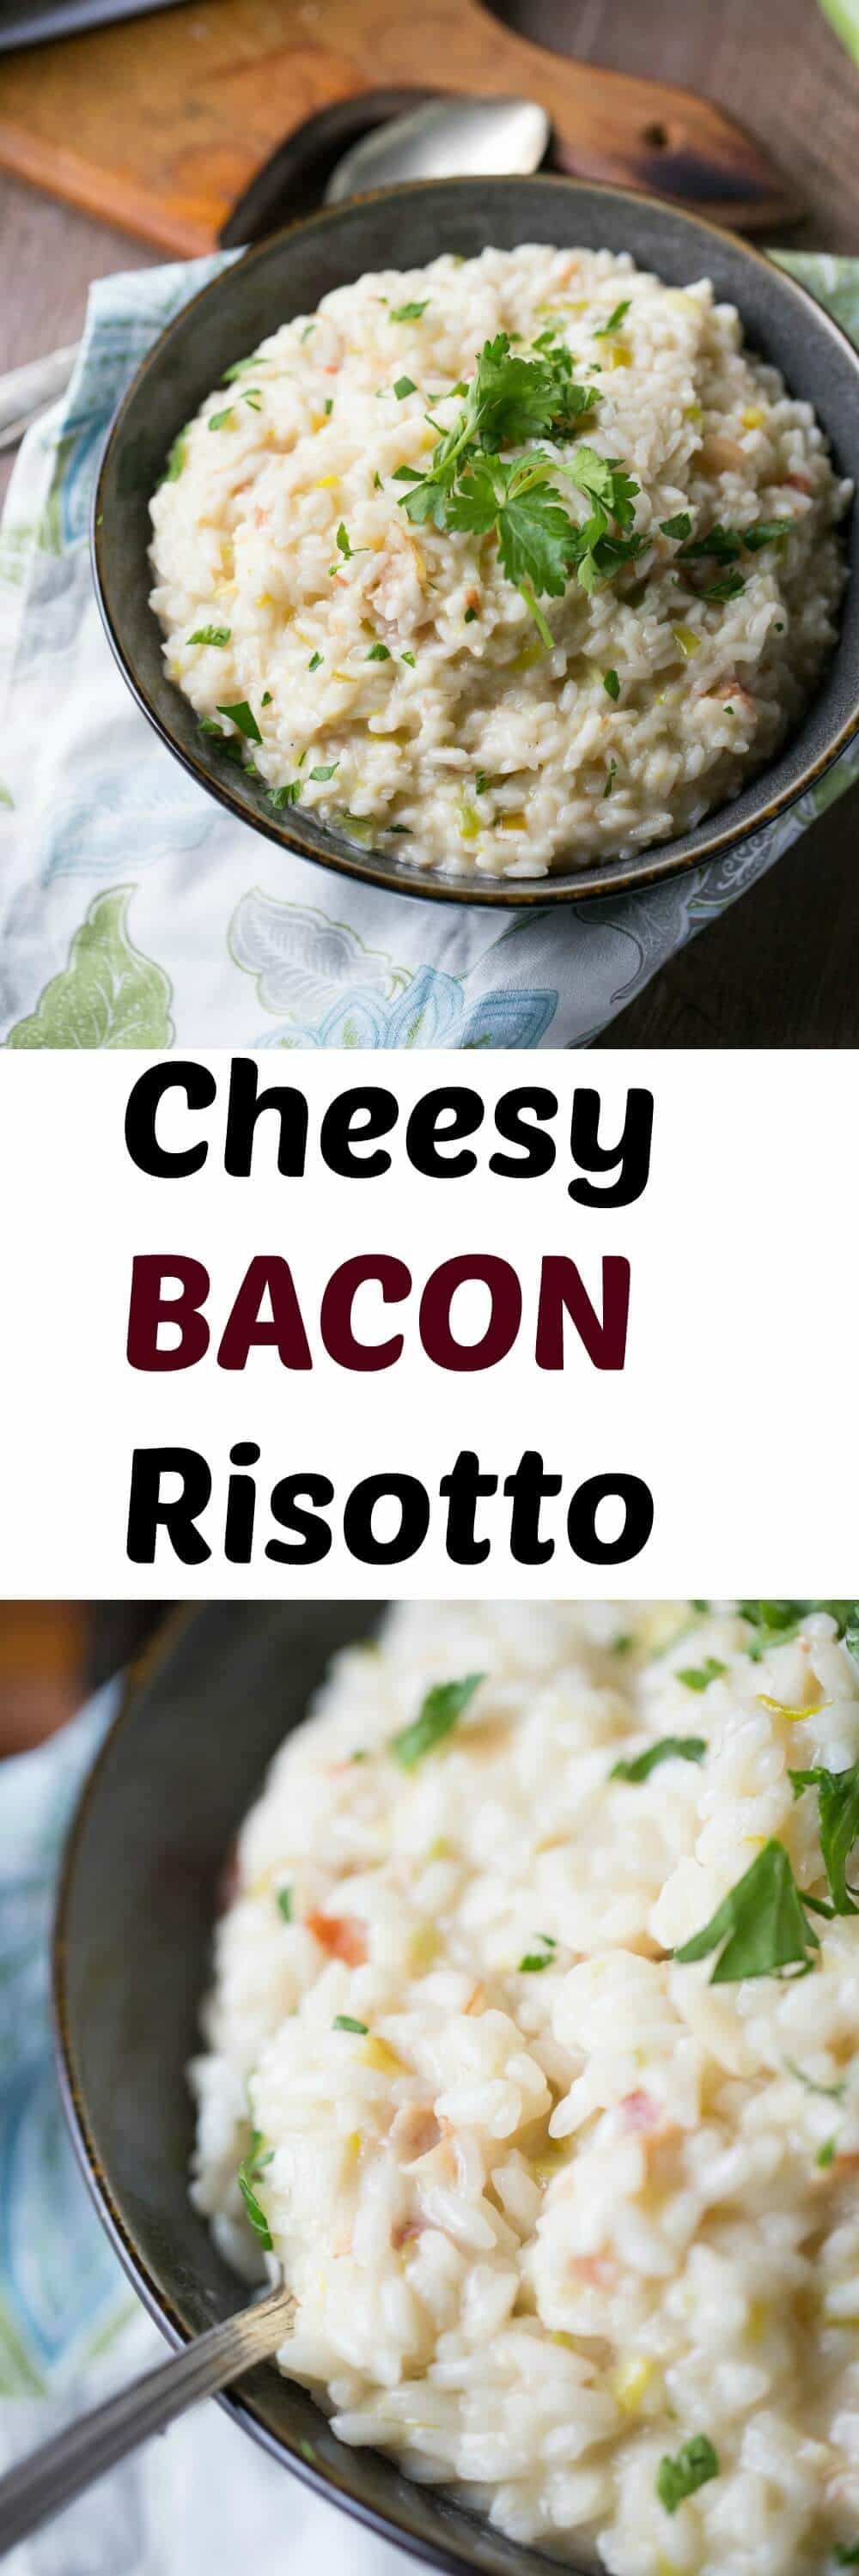 This bacon risotto is epic! This side dish with it's fresh leeks, salty bacon and creamy cheddar is an absolute dream!